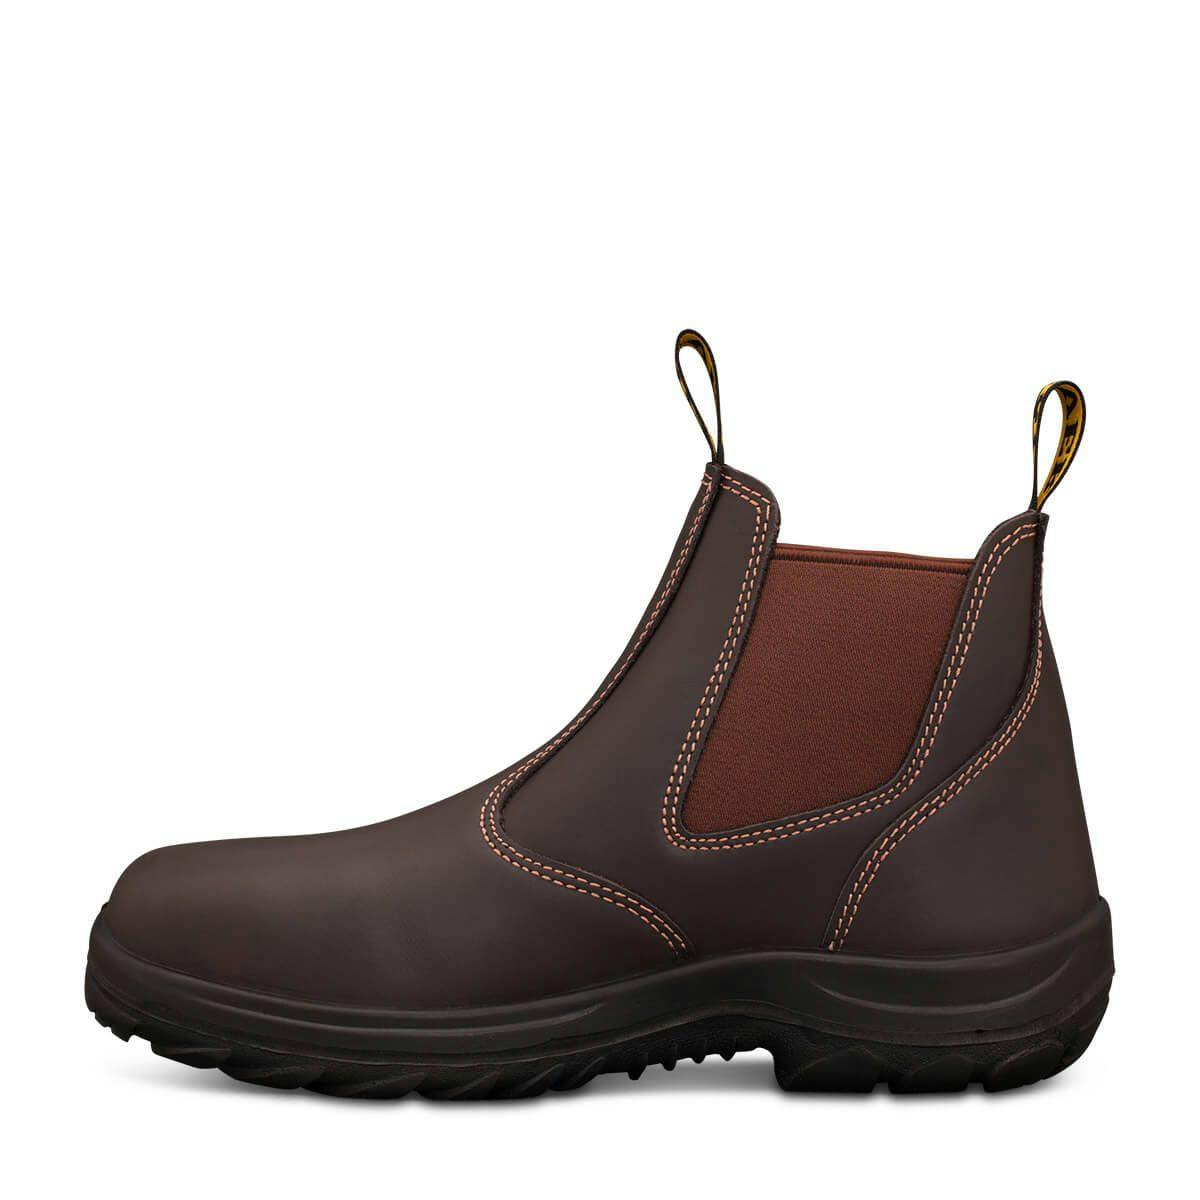 Oliver Elastic Sided Boots, Water Resistant Full Grain Leather_4